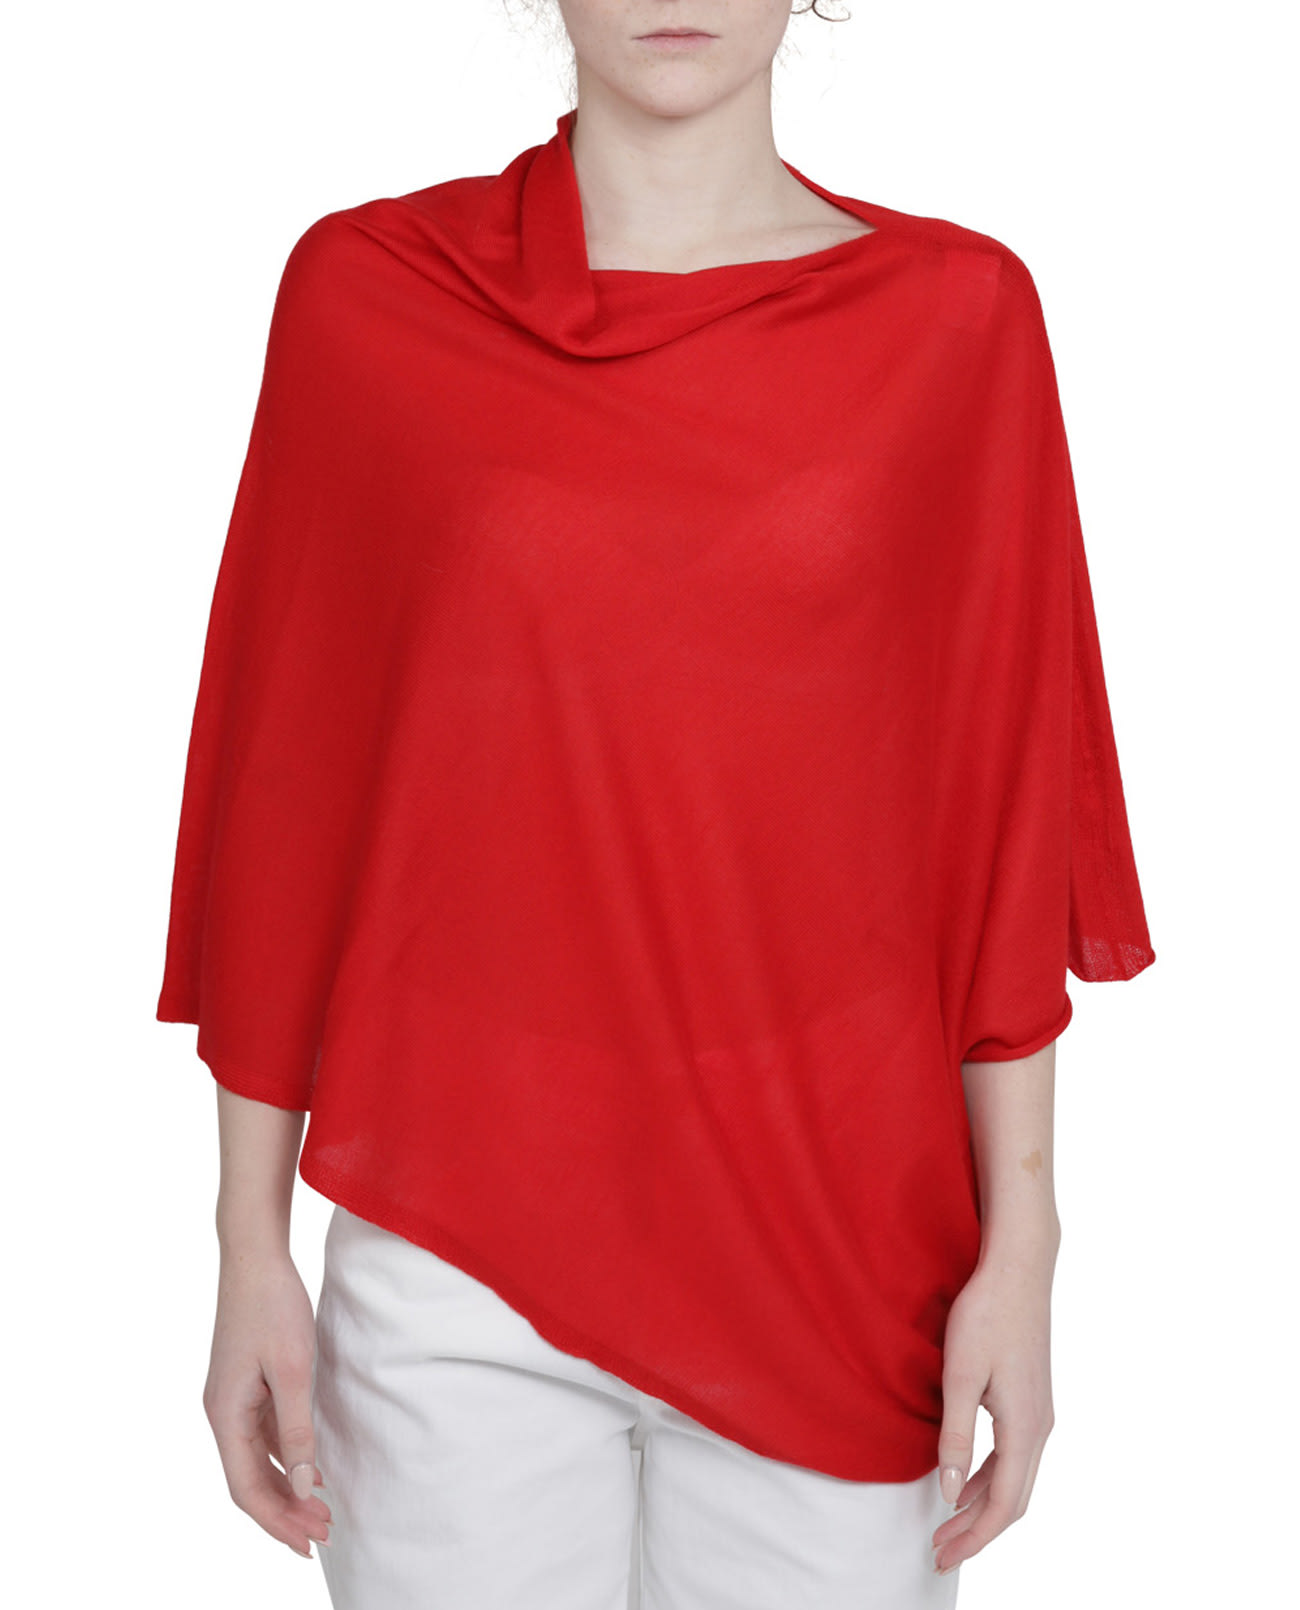 Nenah Red Poncho Top